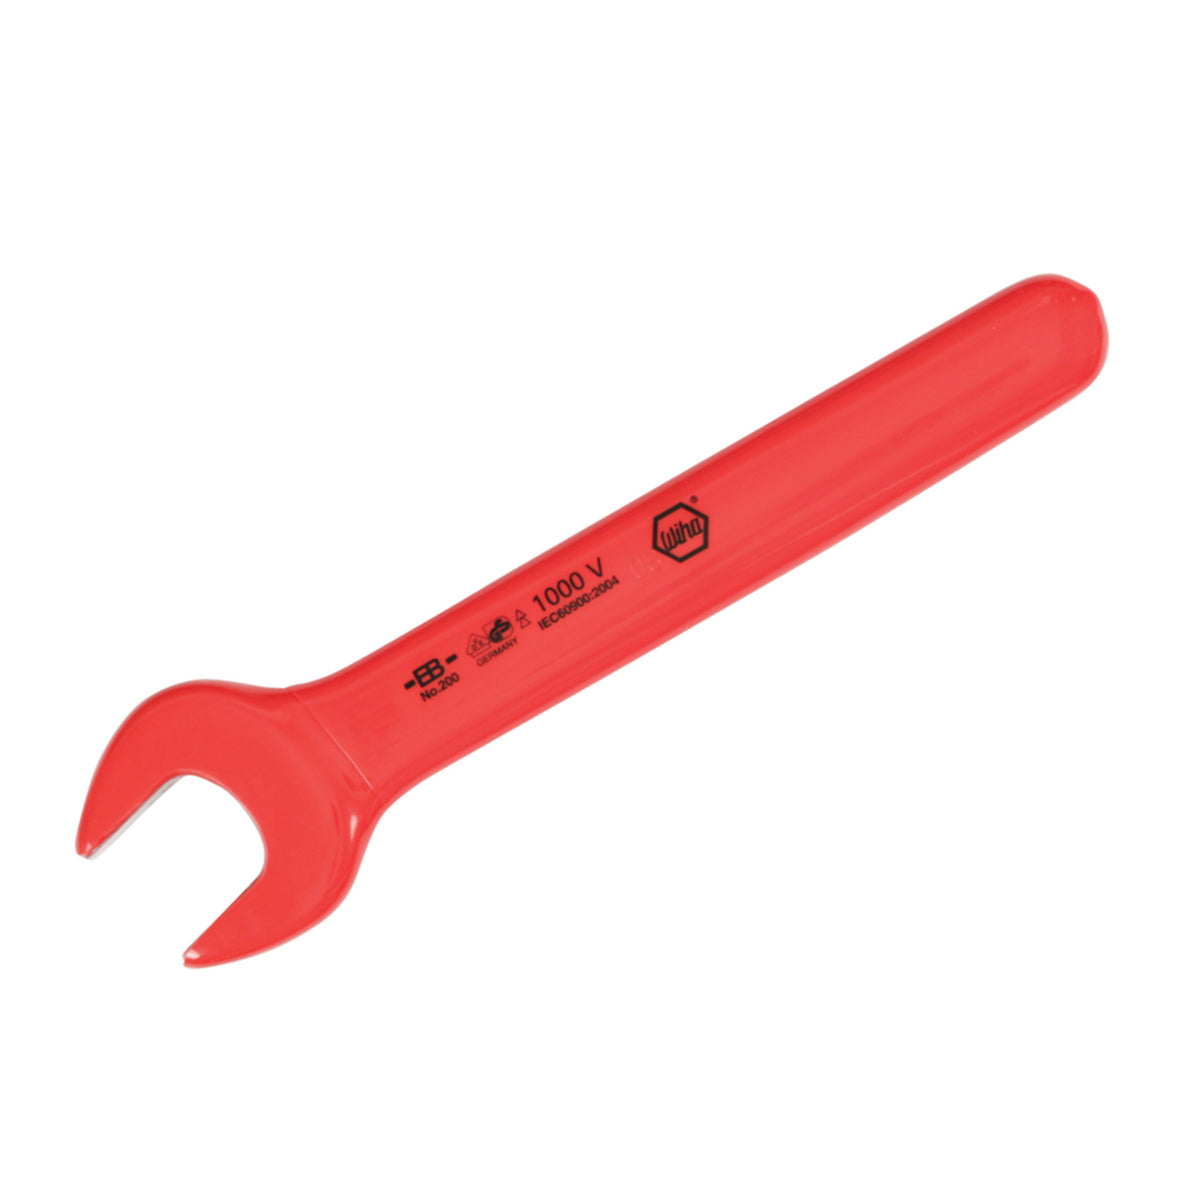 Wiha 20137 Insulated Open End Wrench 1/2"